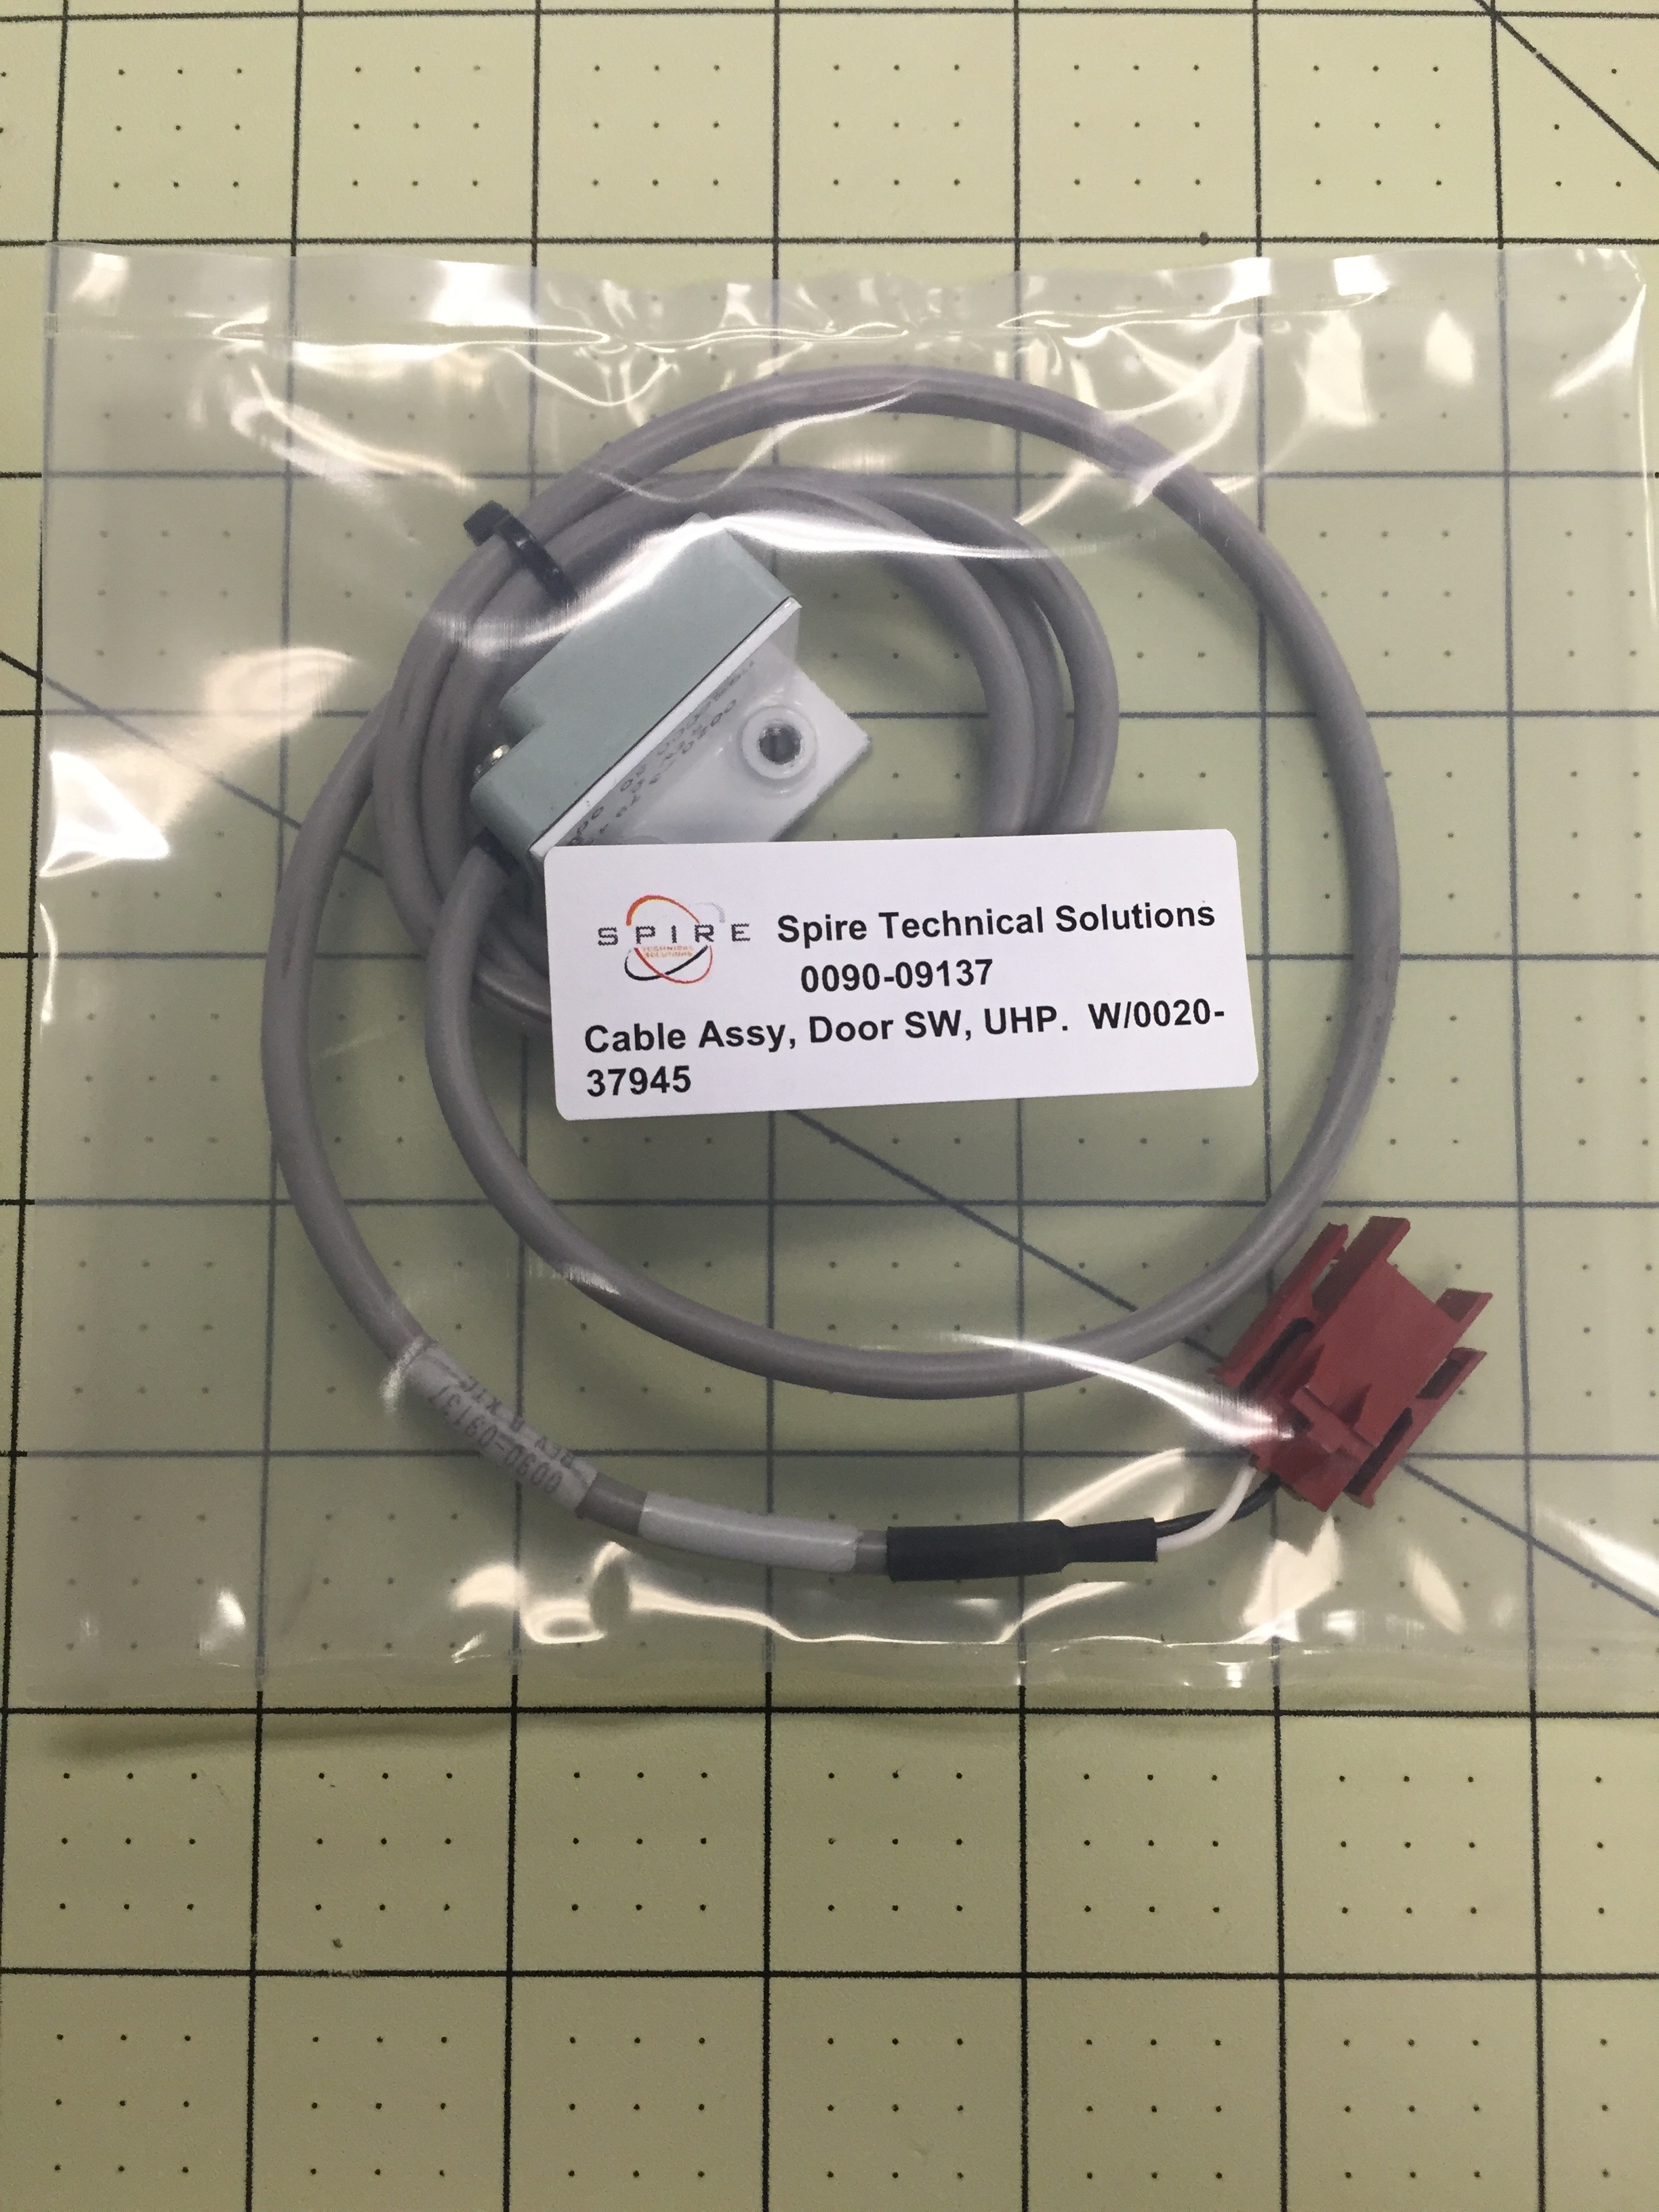 Cable Assy, Door SW, UHP. 